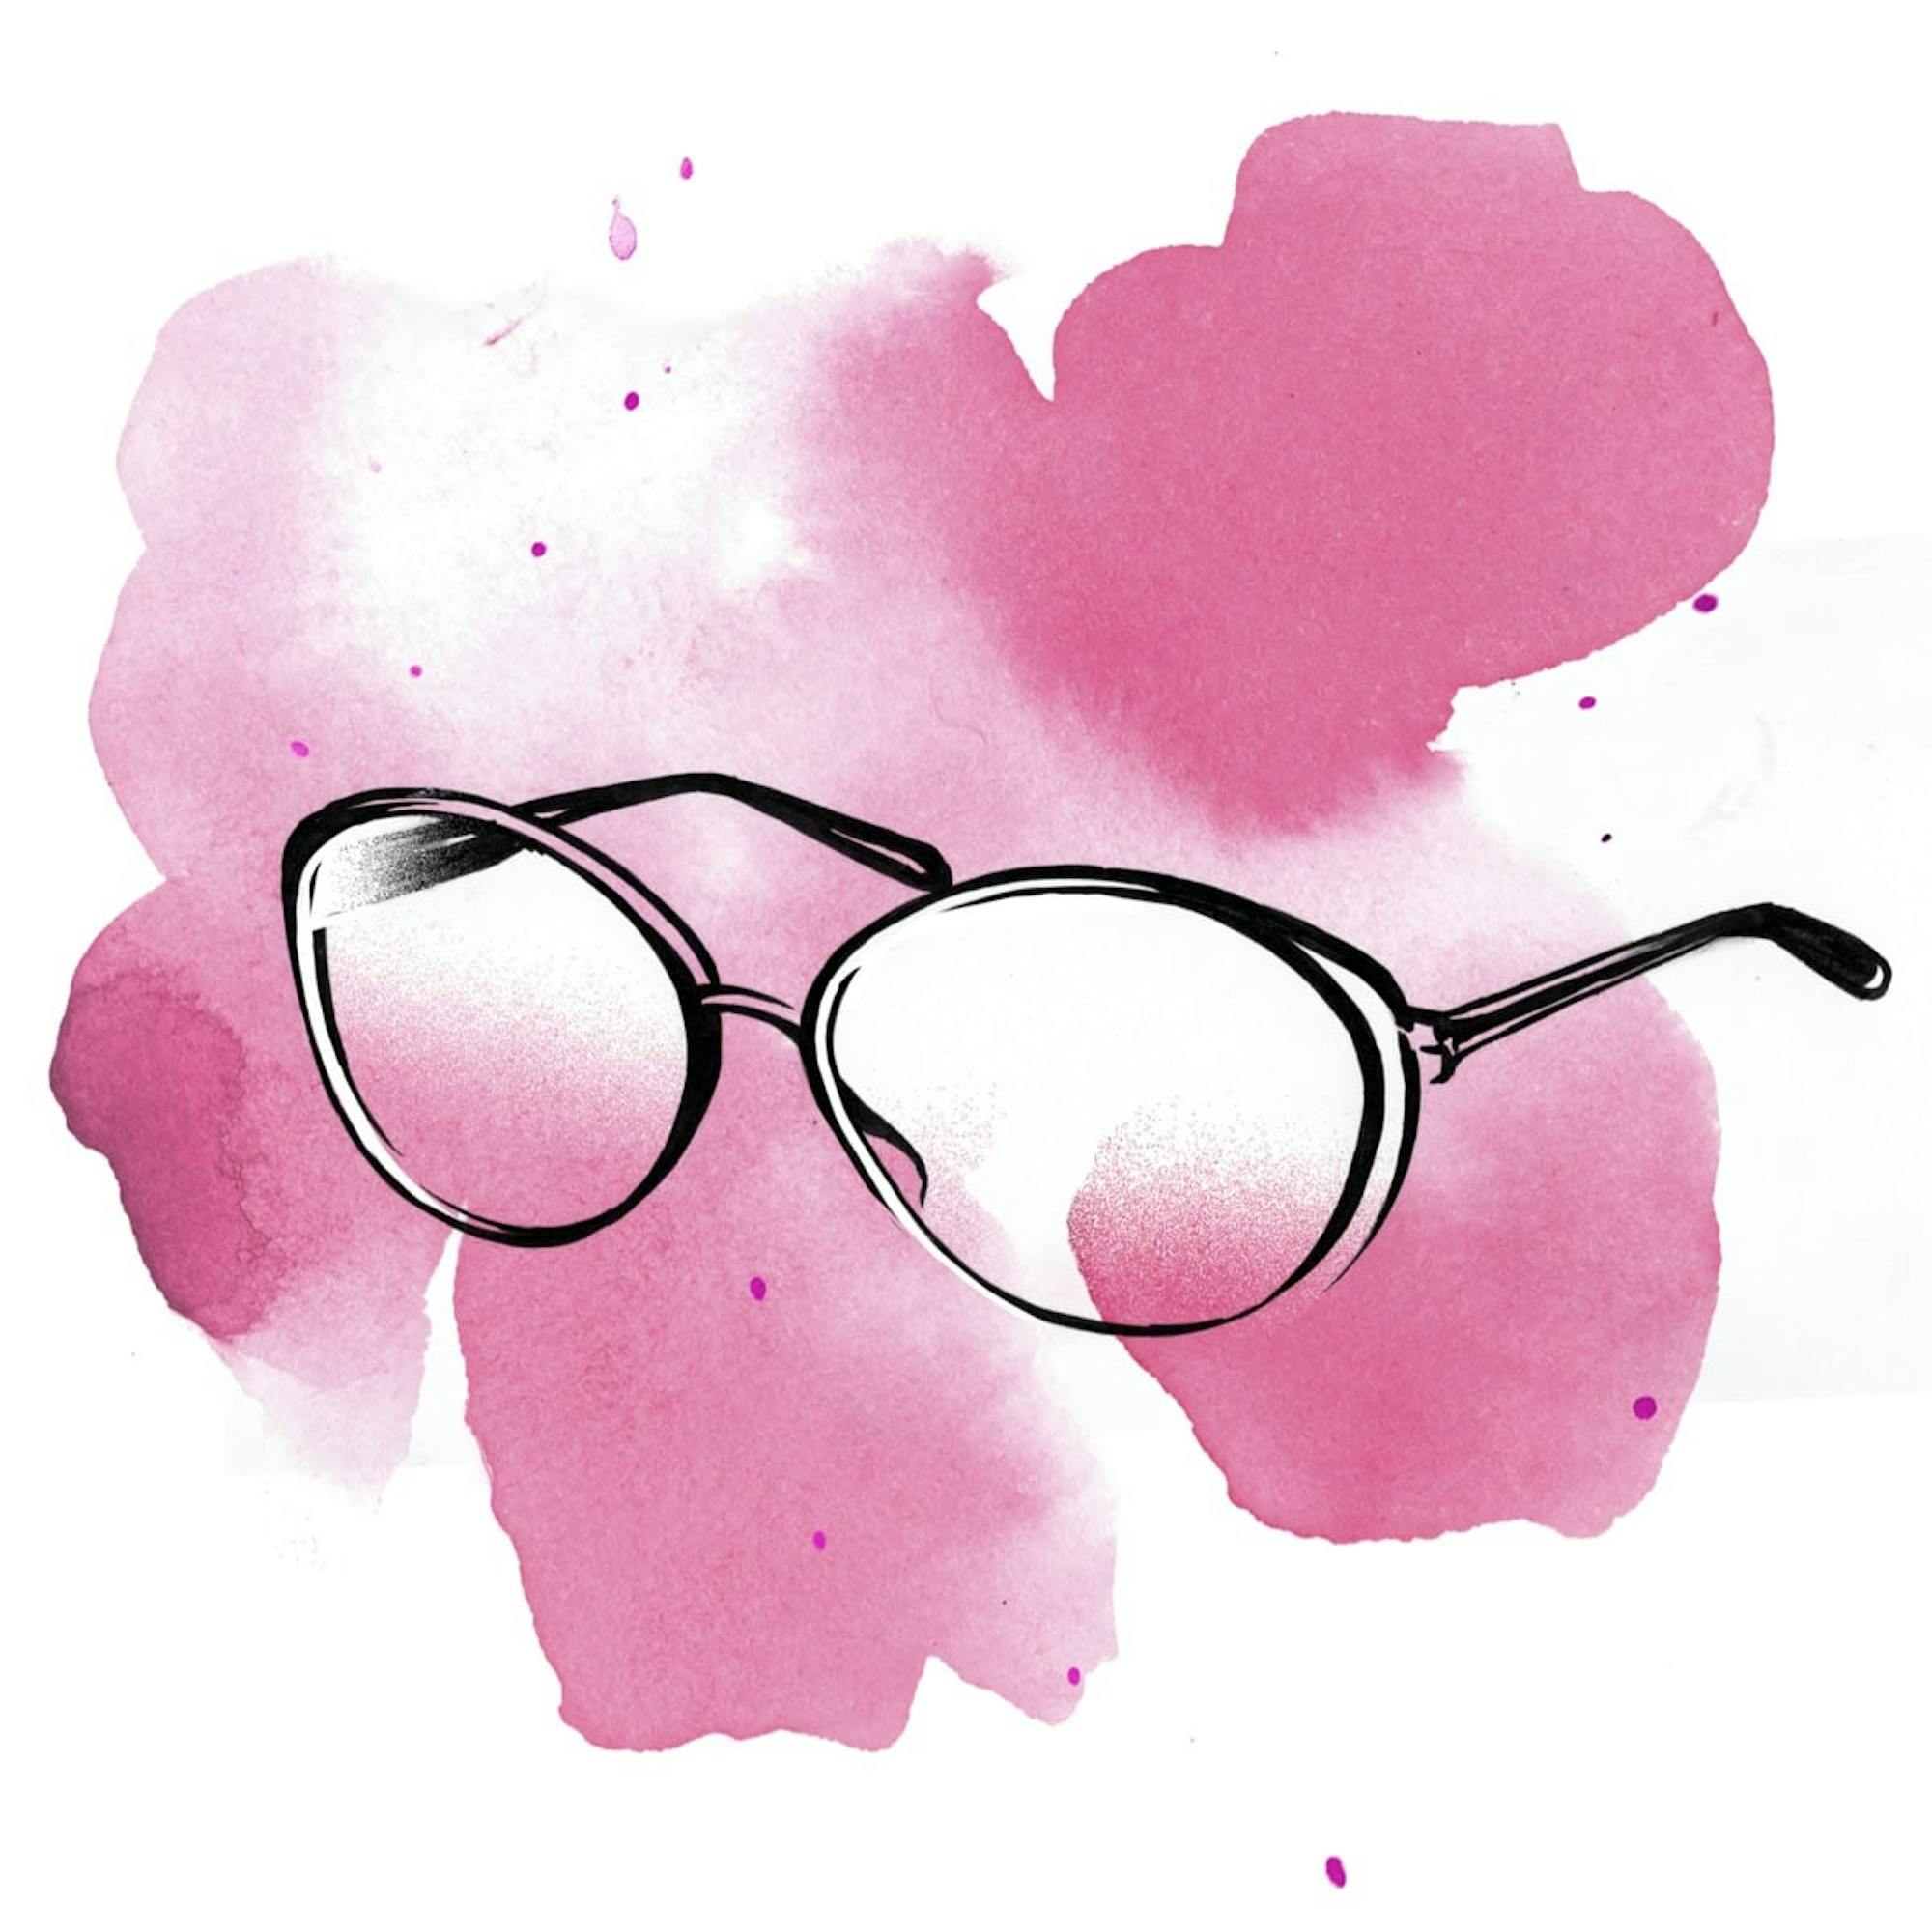 A whimsical watercolor illustration of glasses à la Miranda Priestly, Meryl Streep’s iconic character from The Devil Wears Prada.